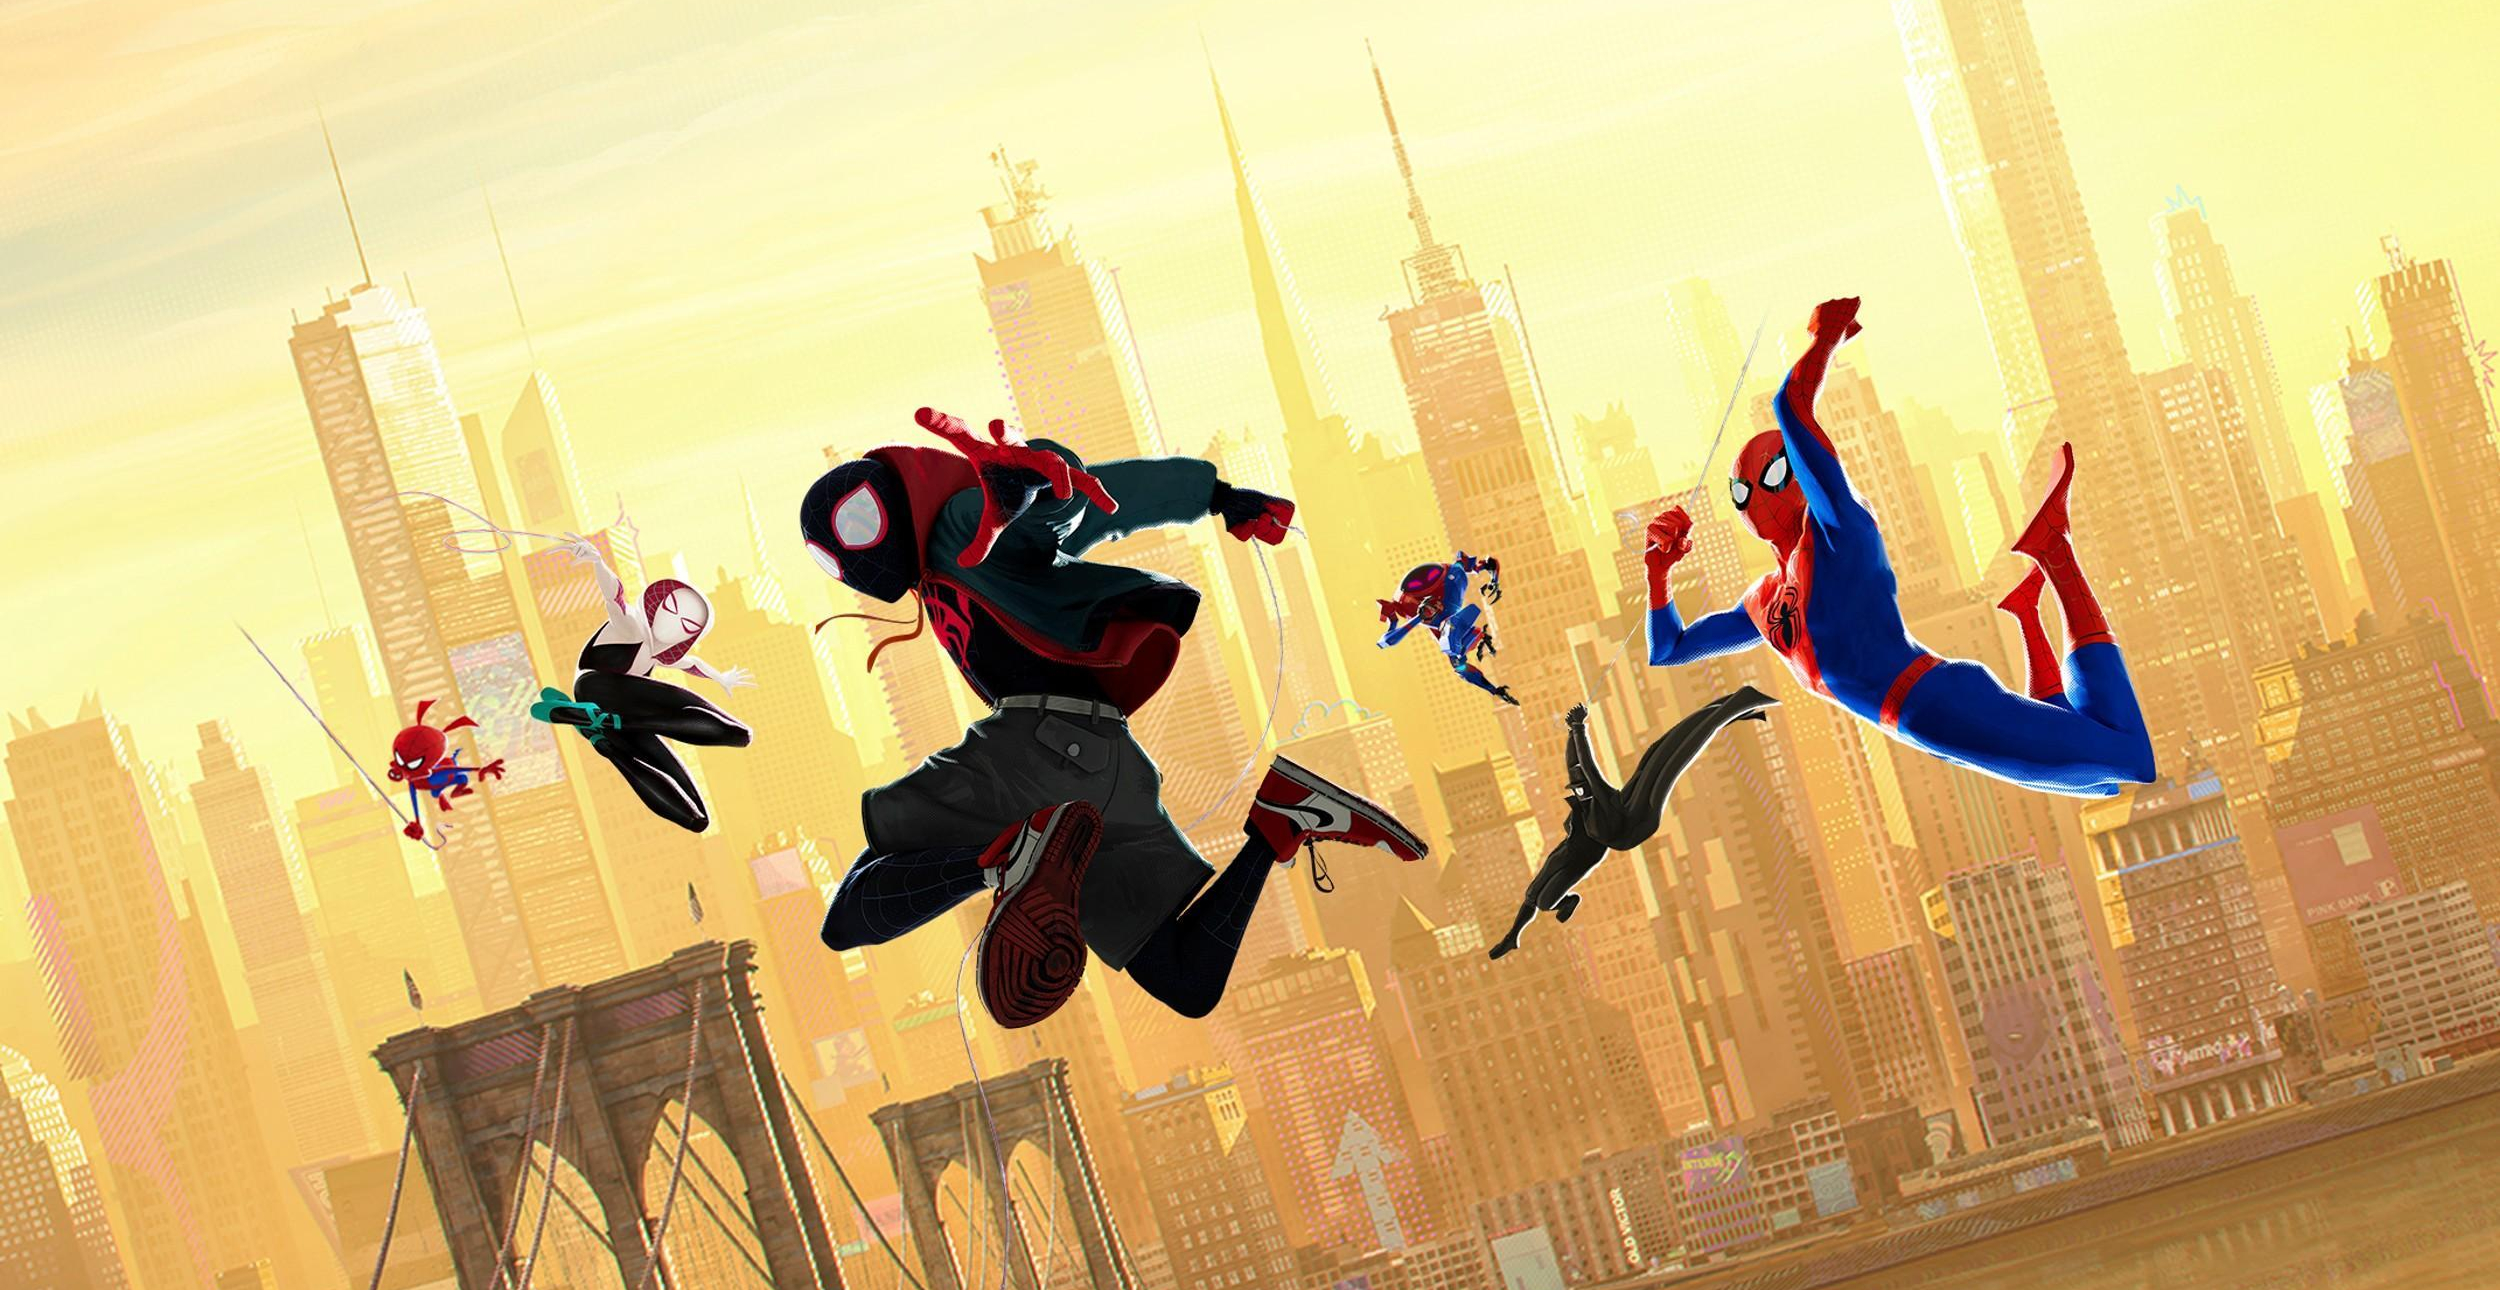 238282_into-the-spider-verse-wallpaper